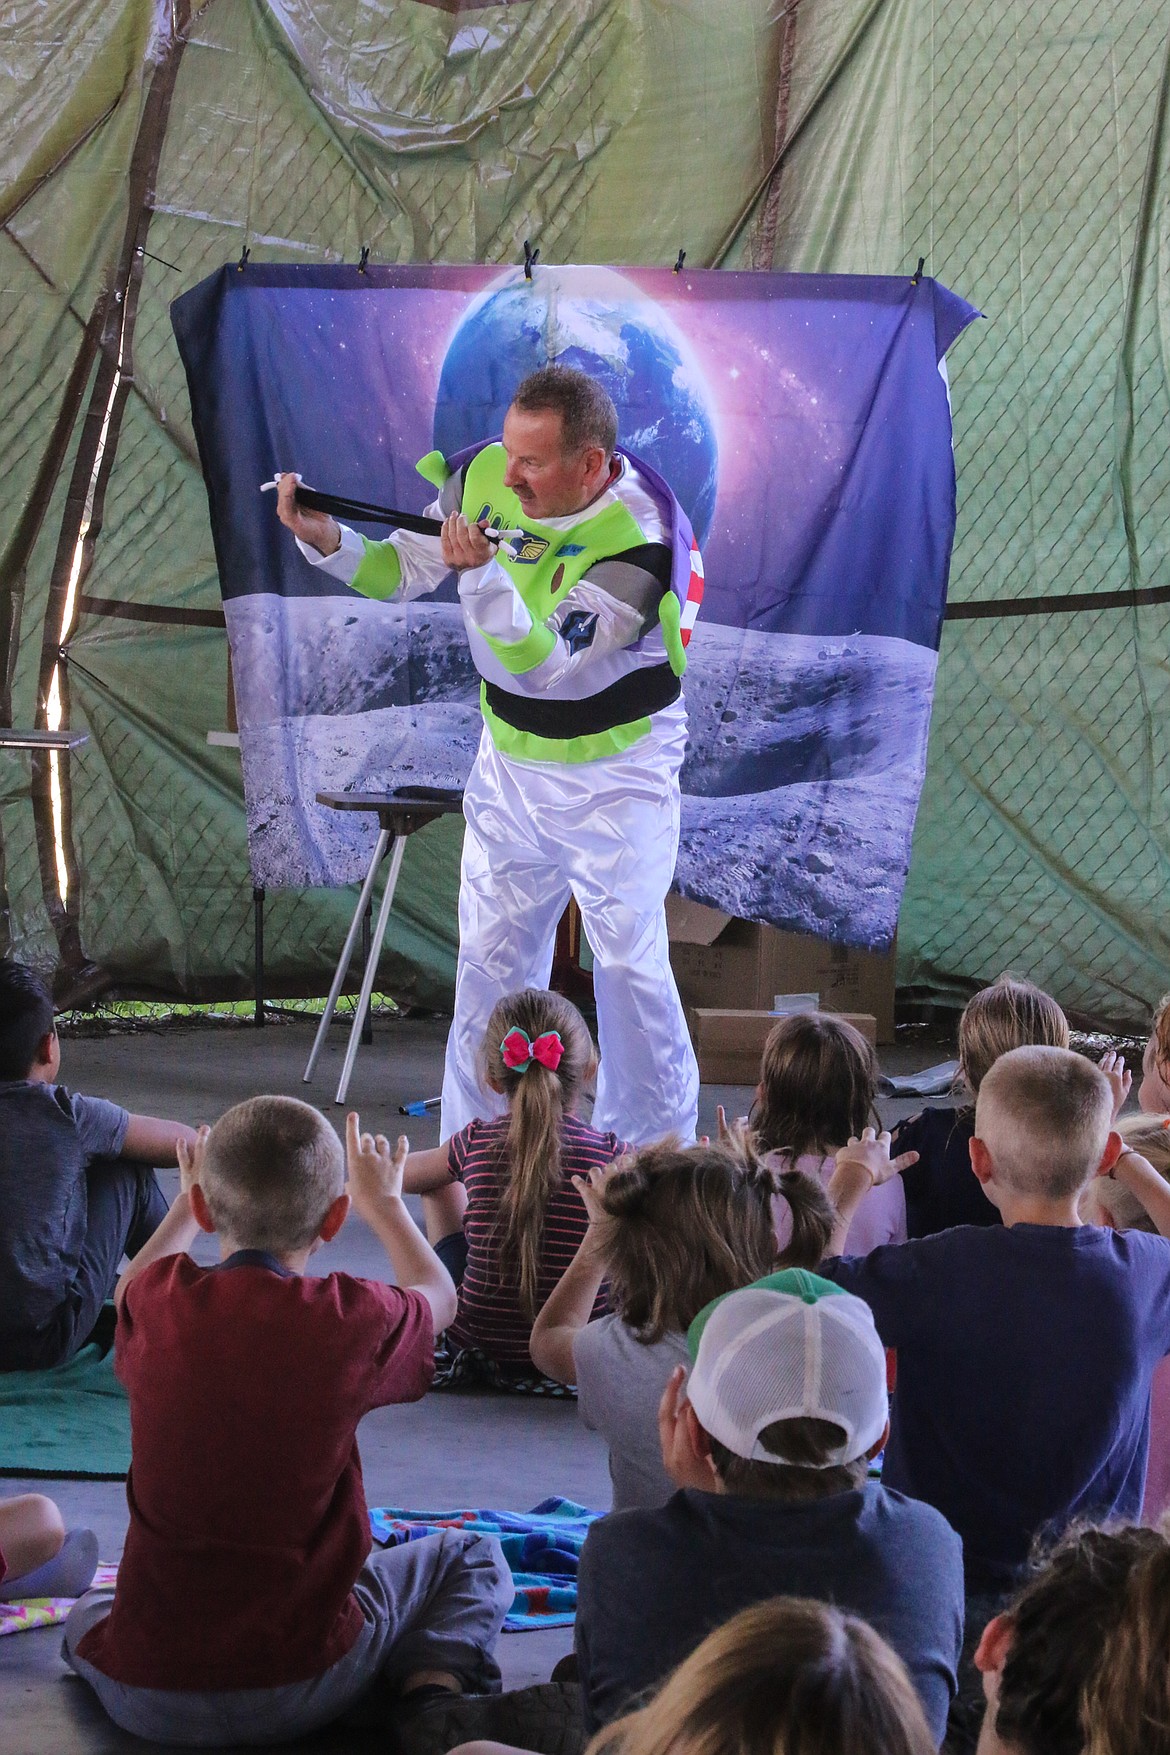 Photo by MANDI BATEMAN
Despite gusts of wind, Dave the Magic Man thrilled the children at the Boundary County Fairgrounds.